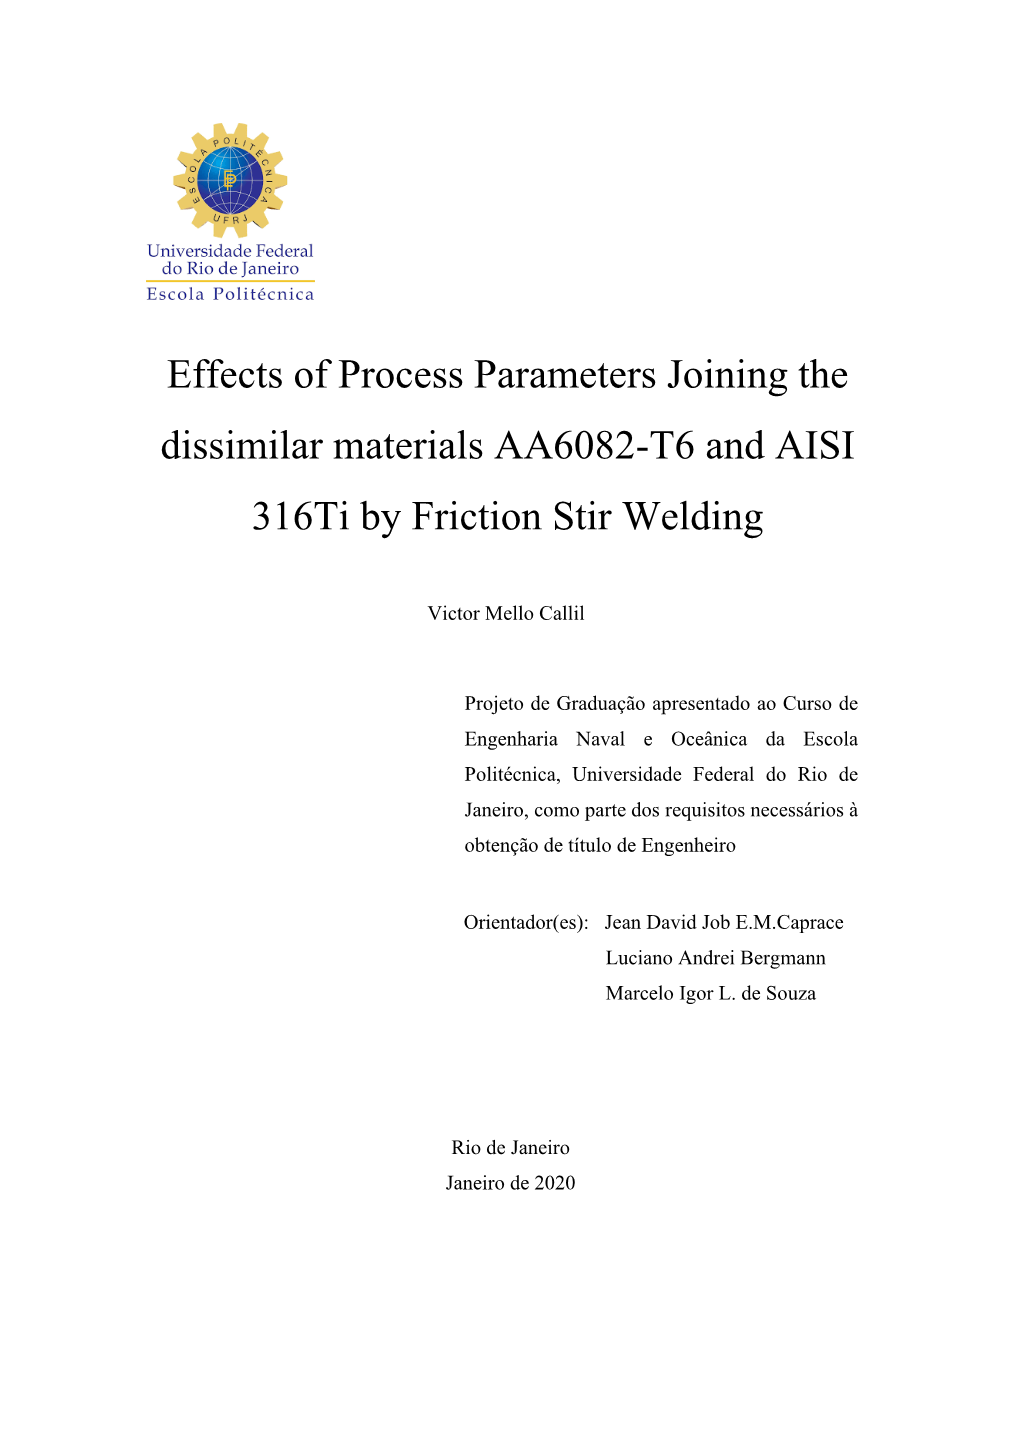 Effects of Process Parameters Joining the Dissimilar Materials AA6082-T6